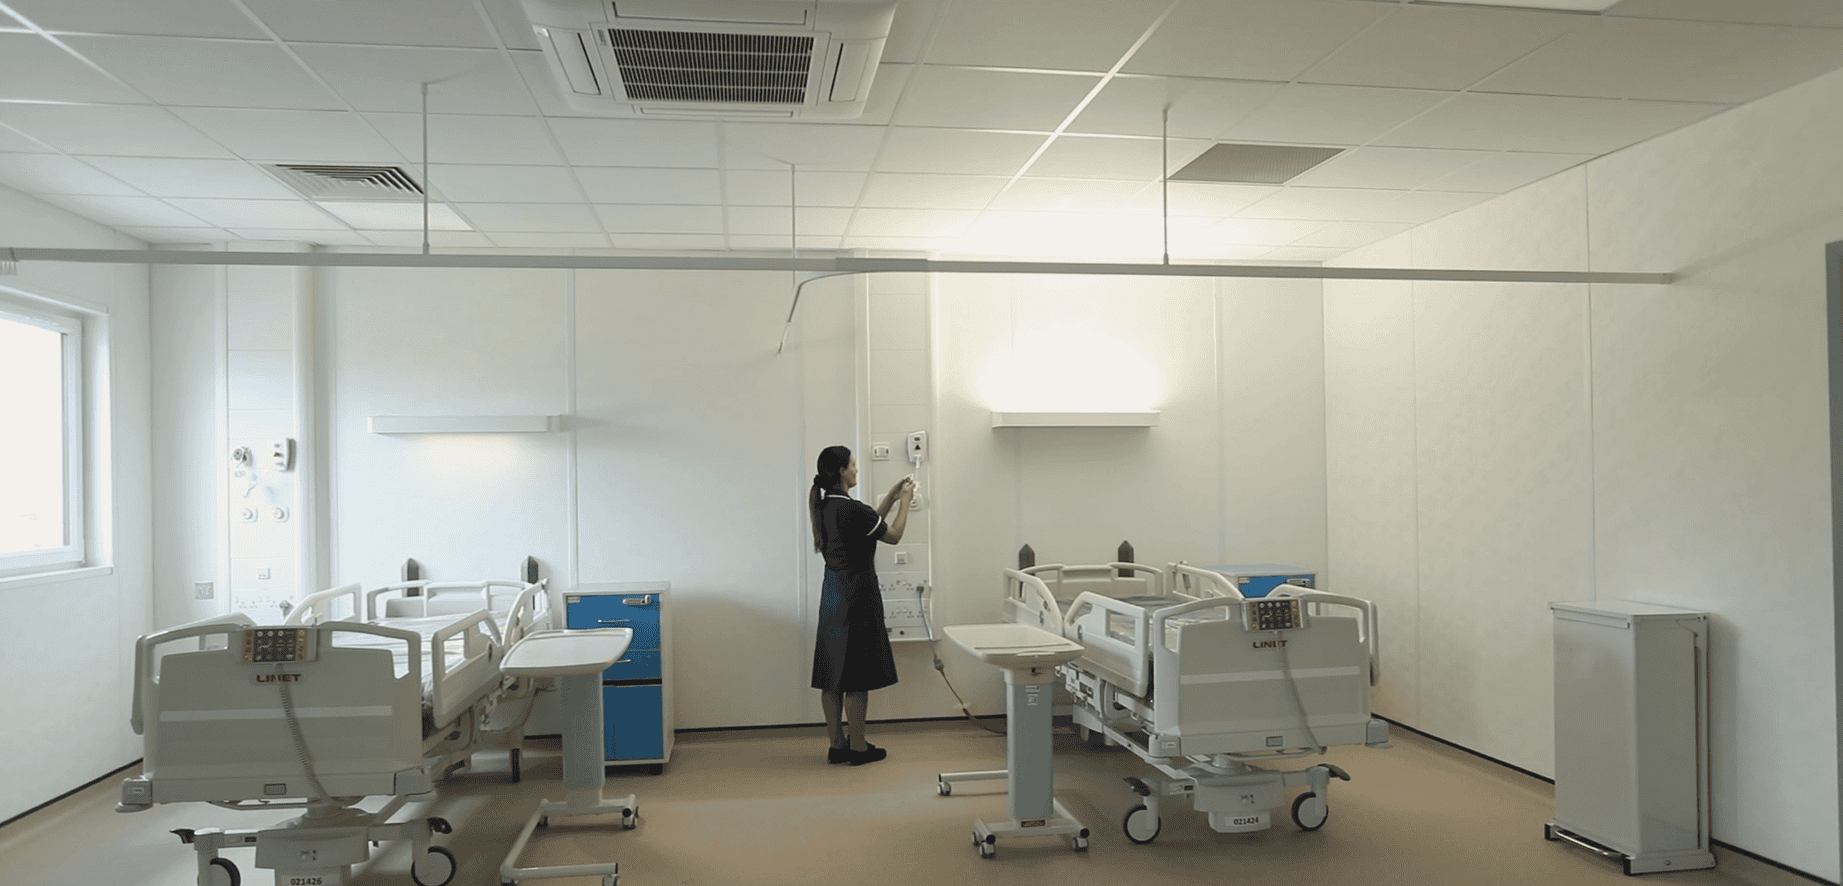 Hospital room inside a modular healthcare building. A nurse checking some machinery on the wall, two hosptial beds with desks.